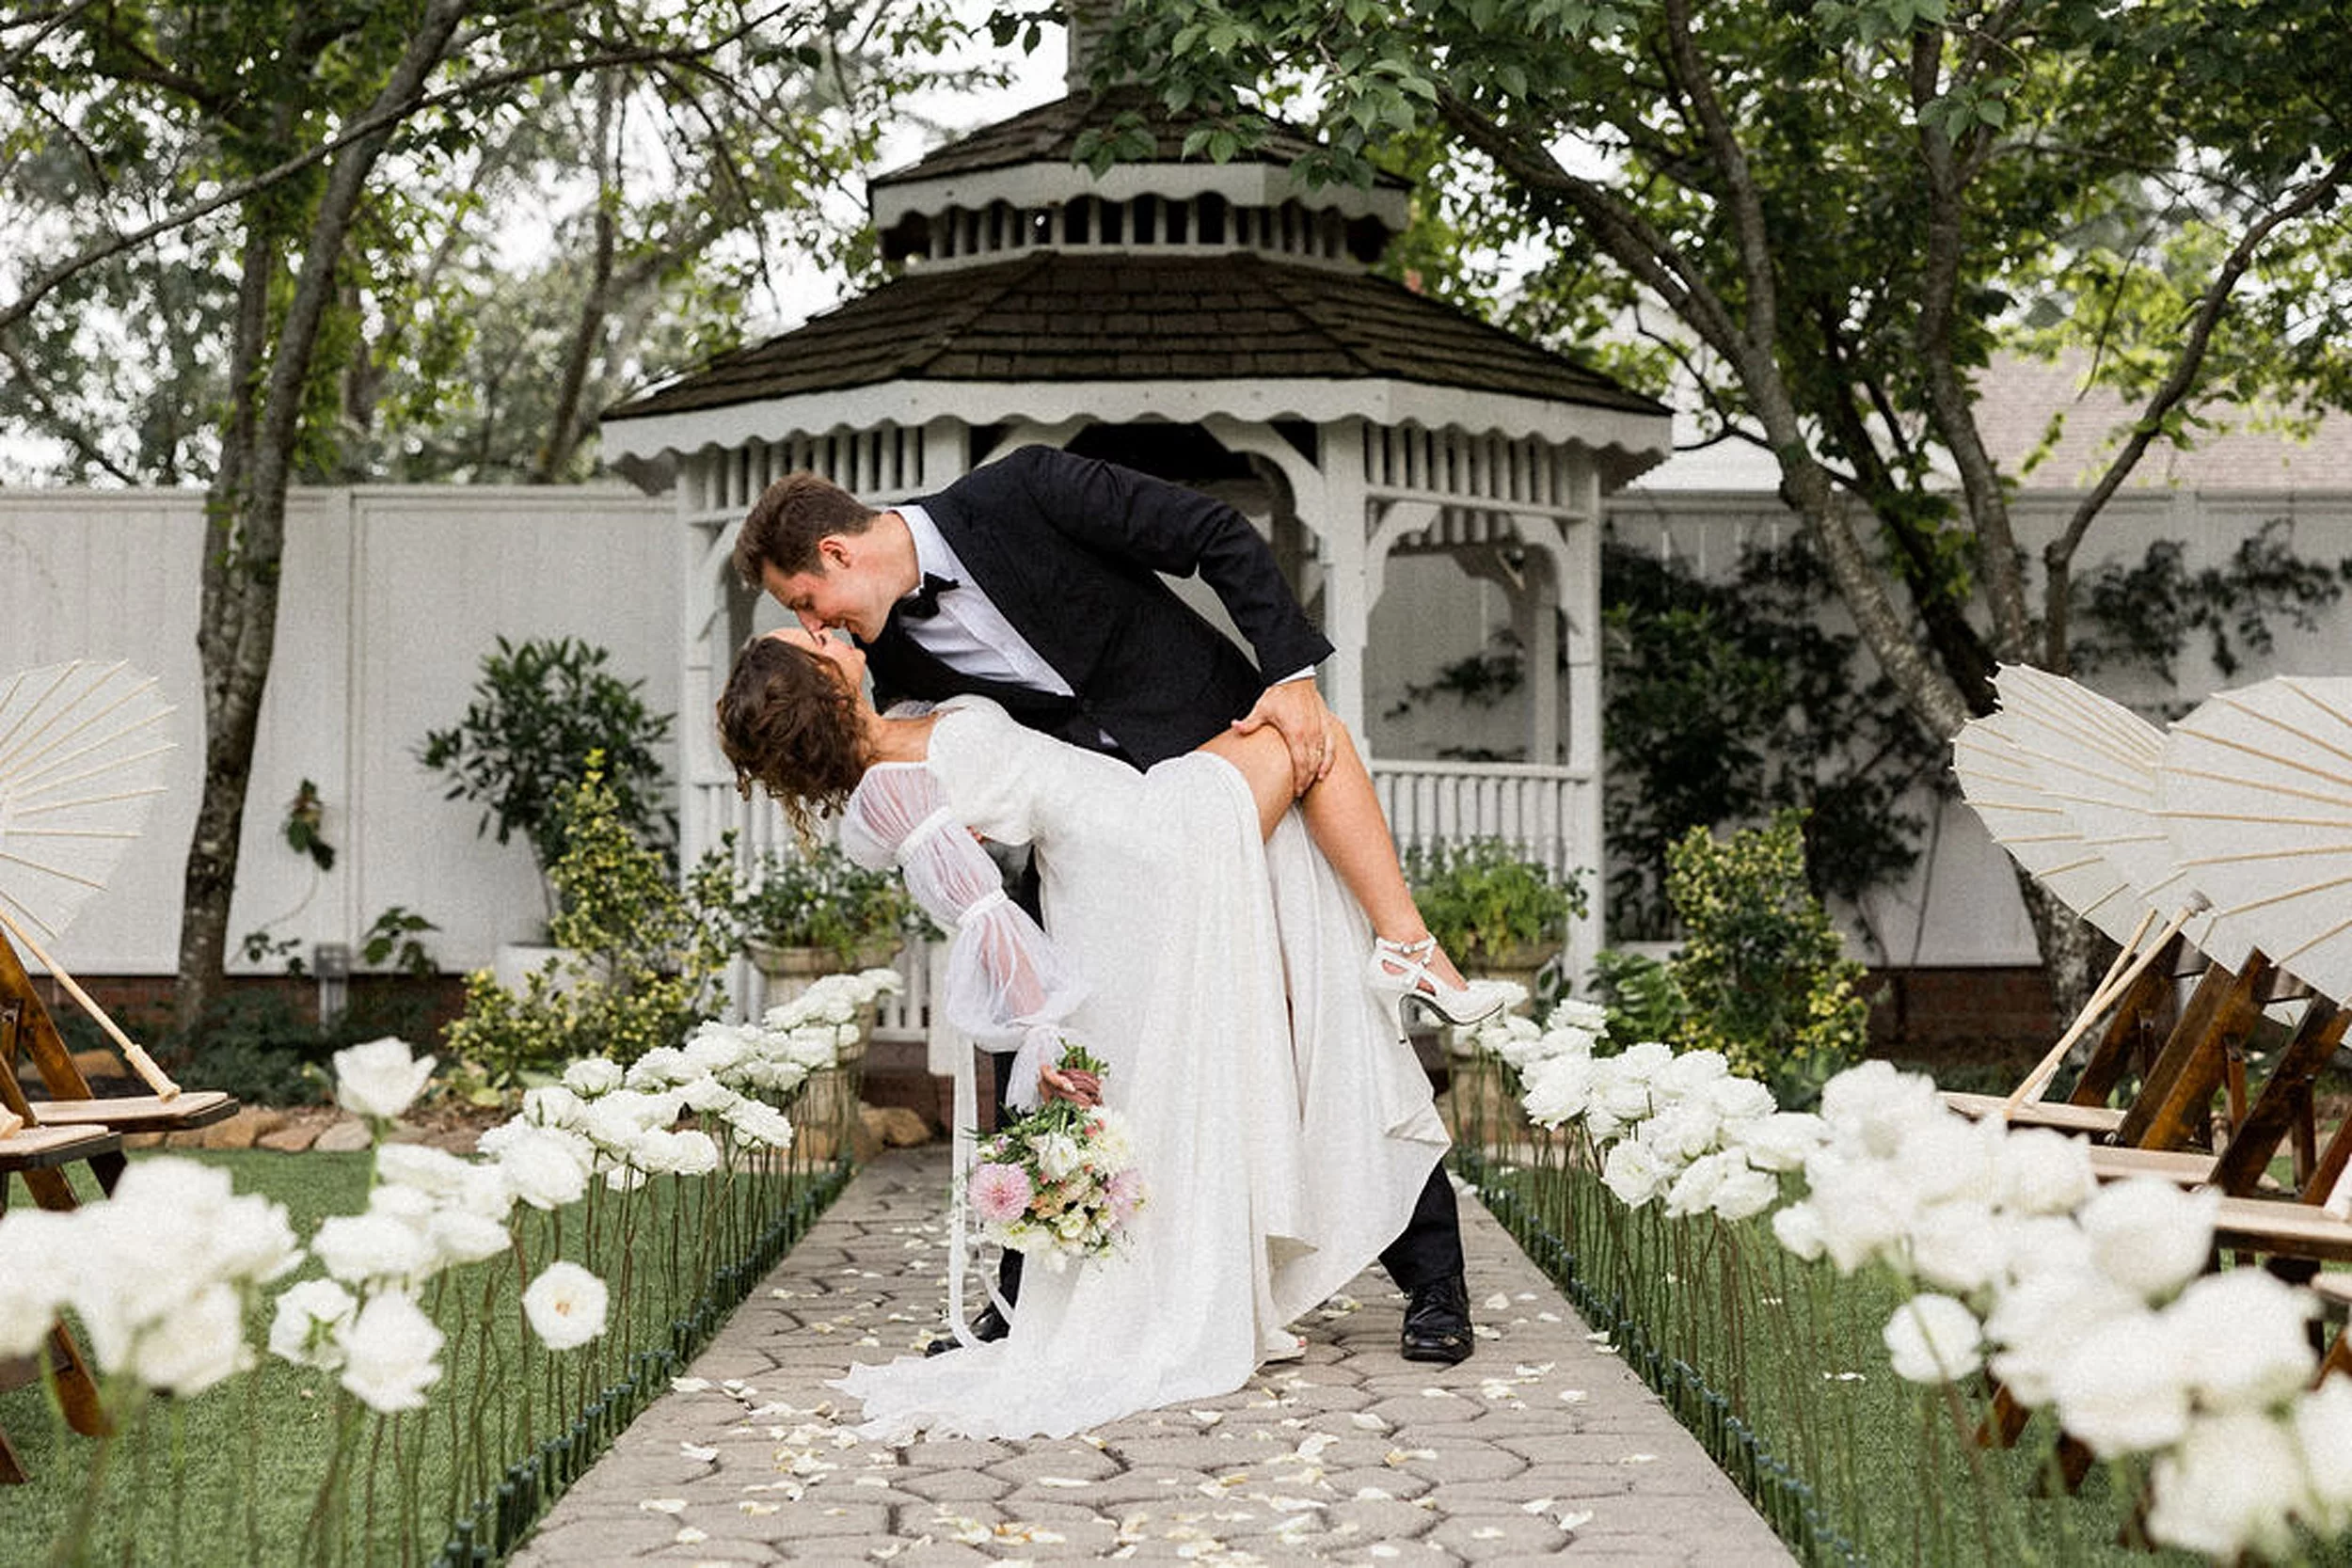 A groom kisses and dips his bride in the stone aisle leading to a gazebo lined with white roses